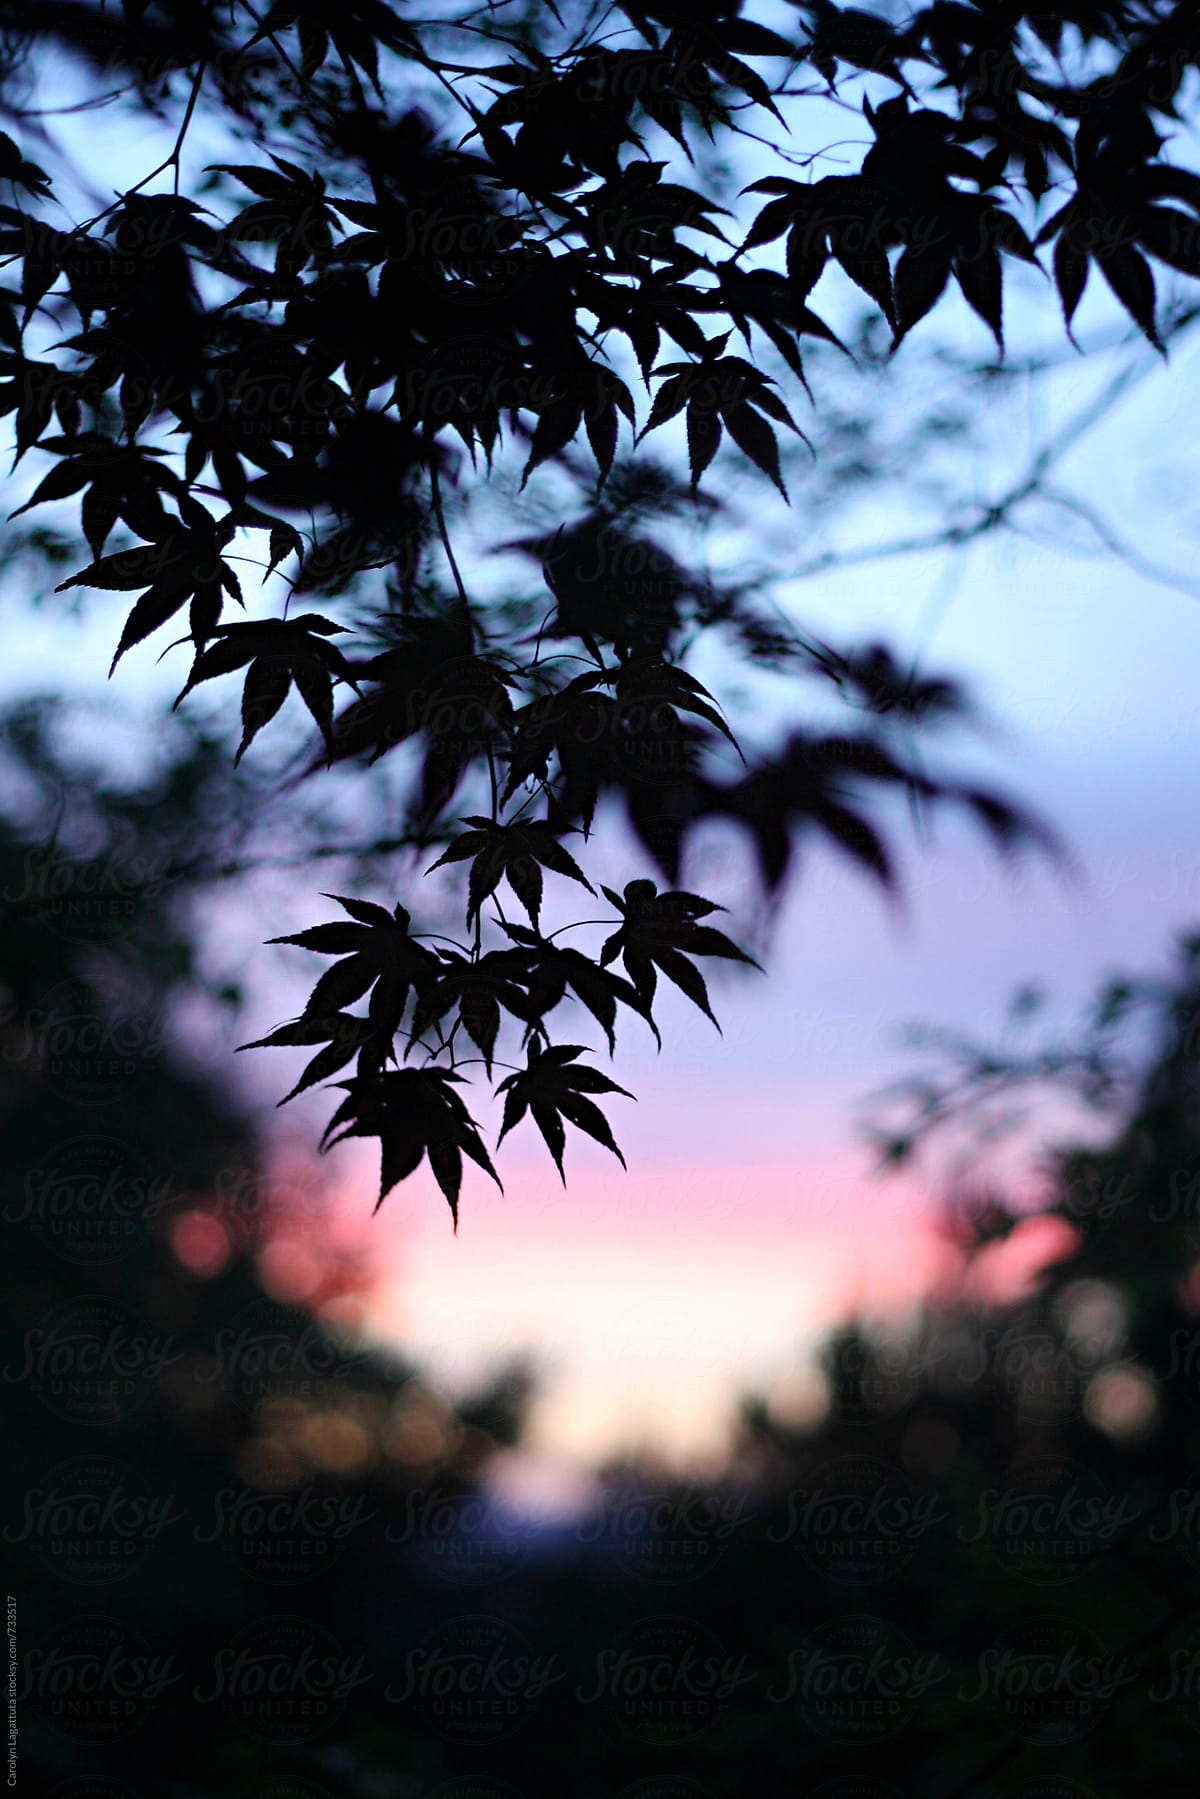 Silhouette of a Japanese Maple against a pink and purple sunset